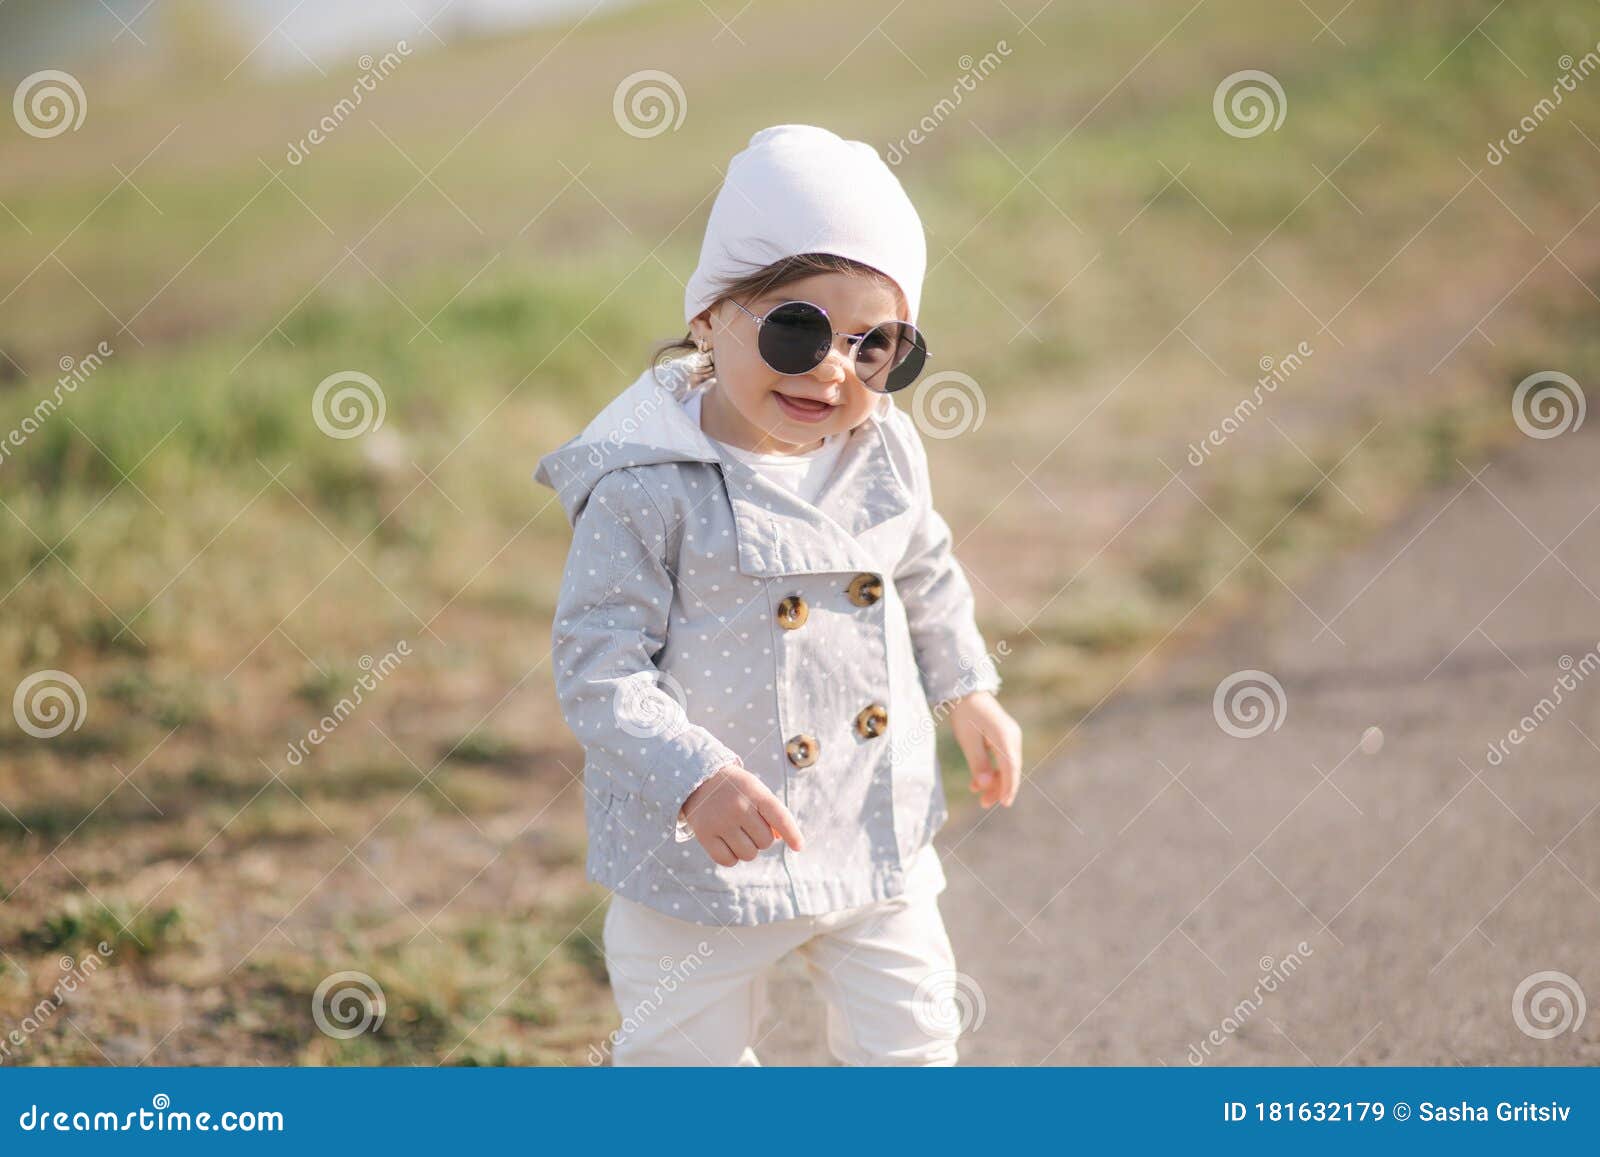 Cute Baby Girl Walking in the Park Near the Embankment. Stylish ...